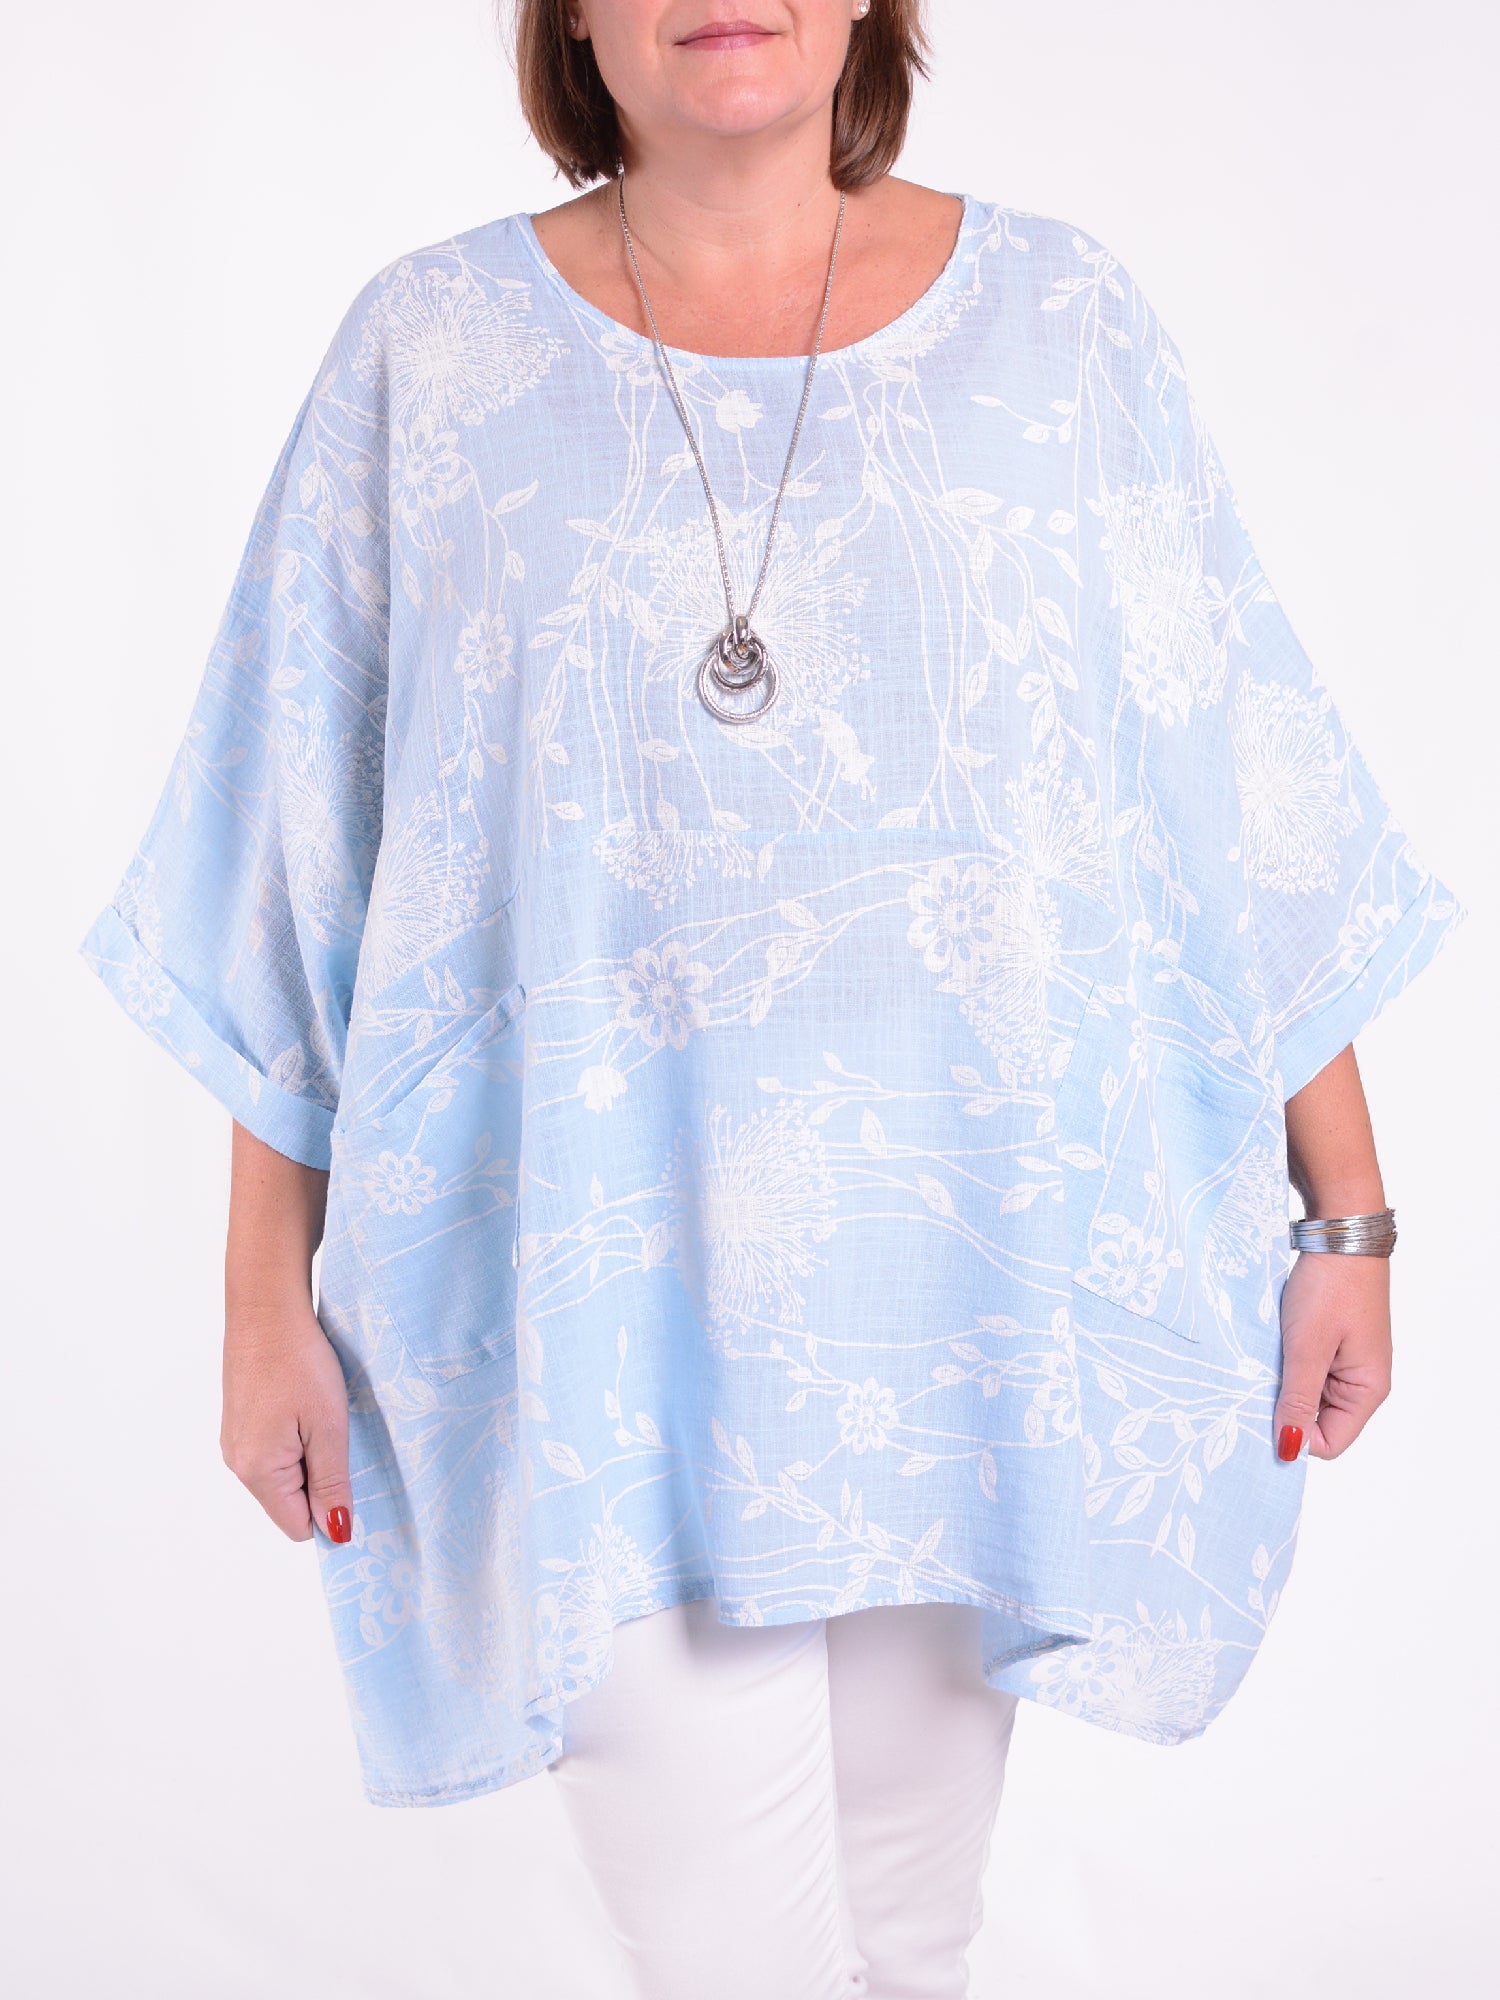 Lagenlook Oversized Cotton Tunic - 10077 FLORAL, Tops & Shirts, Pure Plus Clothing, Lagenlook Clothing, Plus Size Fashion, Over 50 Fashion